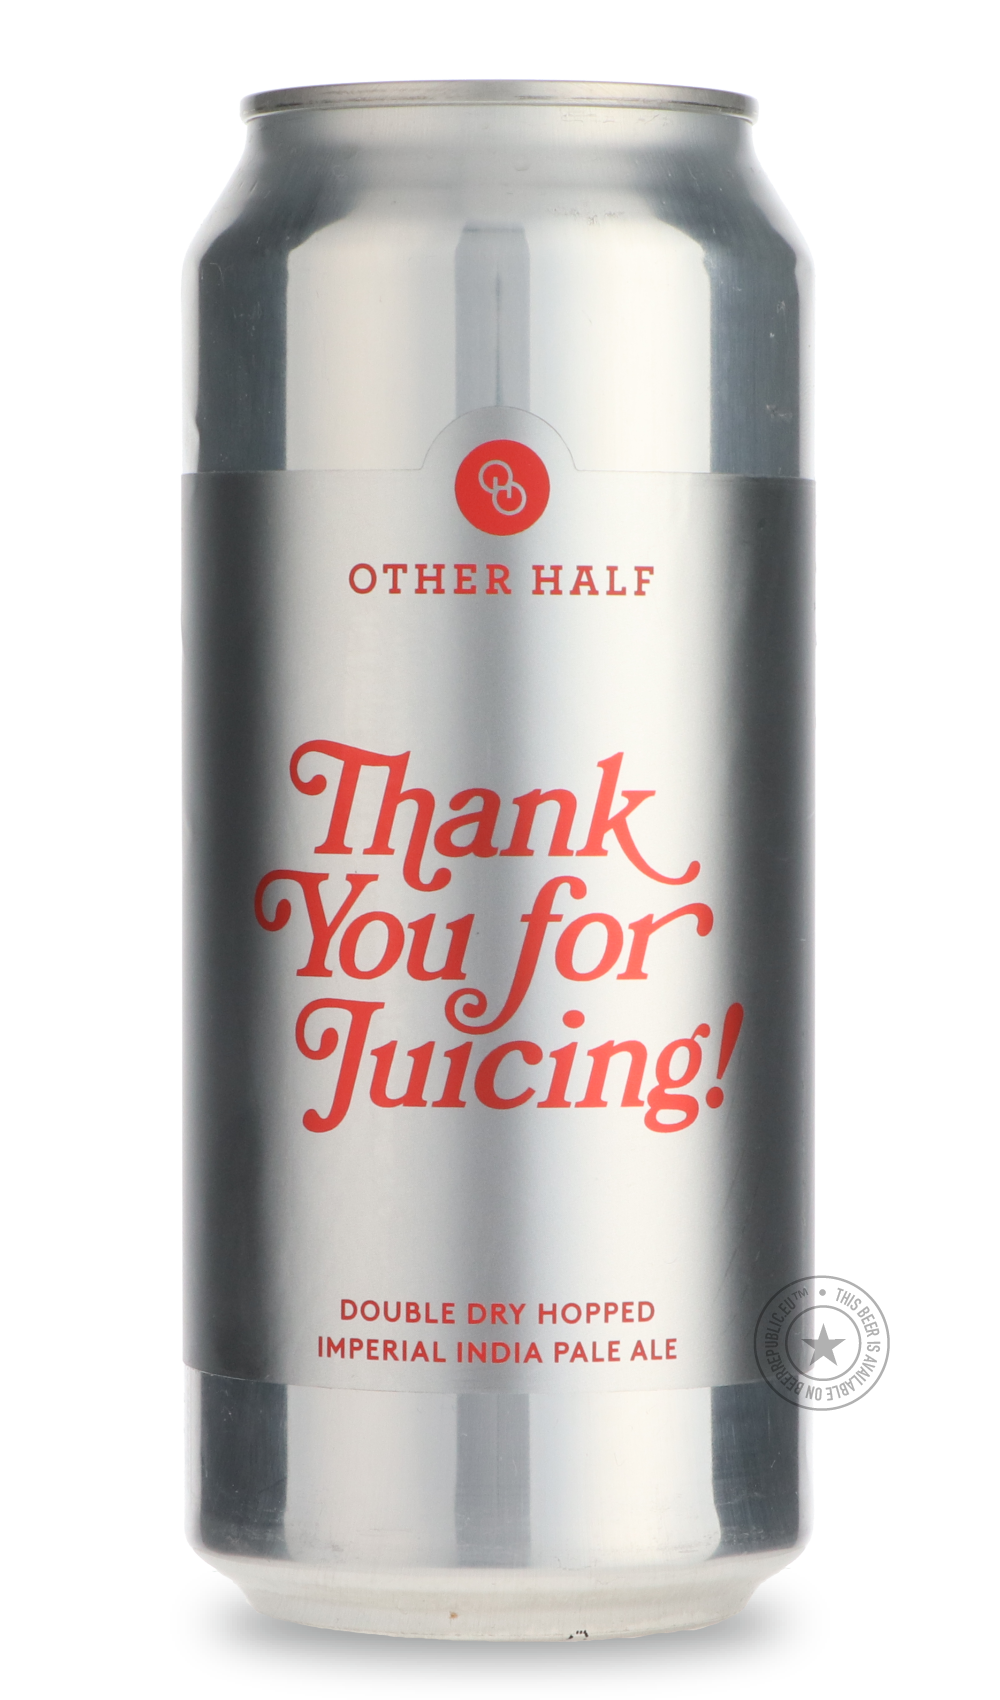 -Other Half- Thank You For Juicing!-IPA- Only @ Beer Republic - The best online beer store for American & Canadian craft beer - Buy beer online from the USA and Canada - Bier online kopen - Amerikaans bier kopen - Craft beer store - Craft beer kopen - Amerikanisch bier kaufen - Bier online kaufen - Acheter biere online - IPA - Stout - Porter - New England IPA - Hazy IPA - Imperial Stout - Barrel Aged - Barrel Aged Imperial Stout - Brown - Dark beer - Blond - Blonde - Pilsner - Lager - Wheat - Weizen - Amber